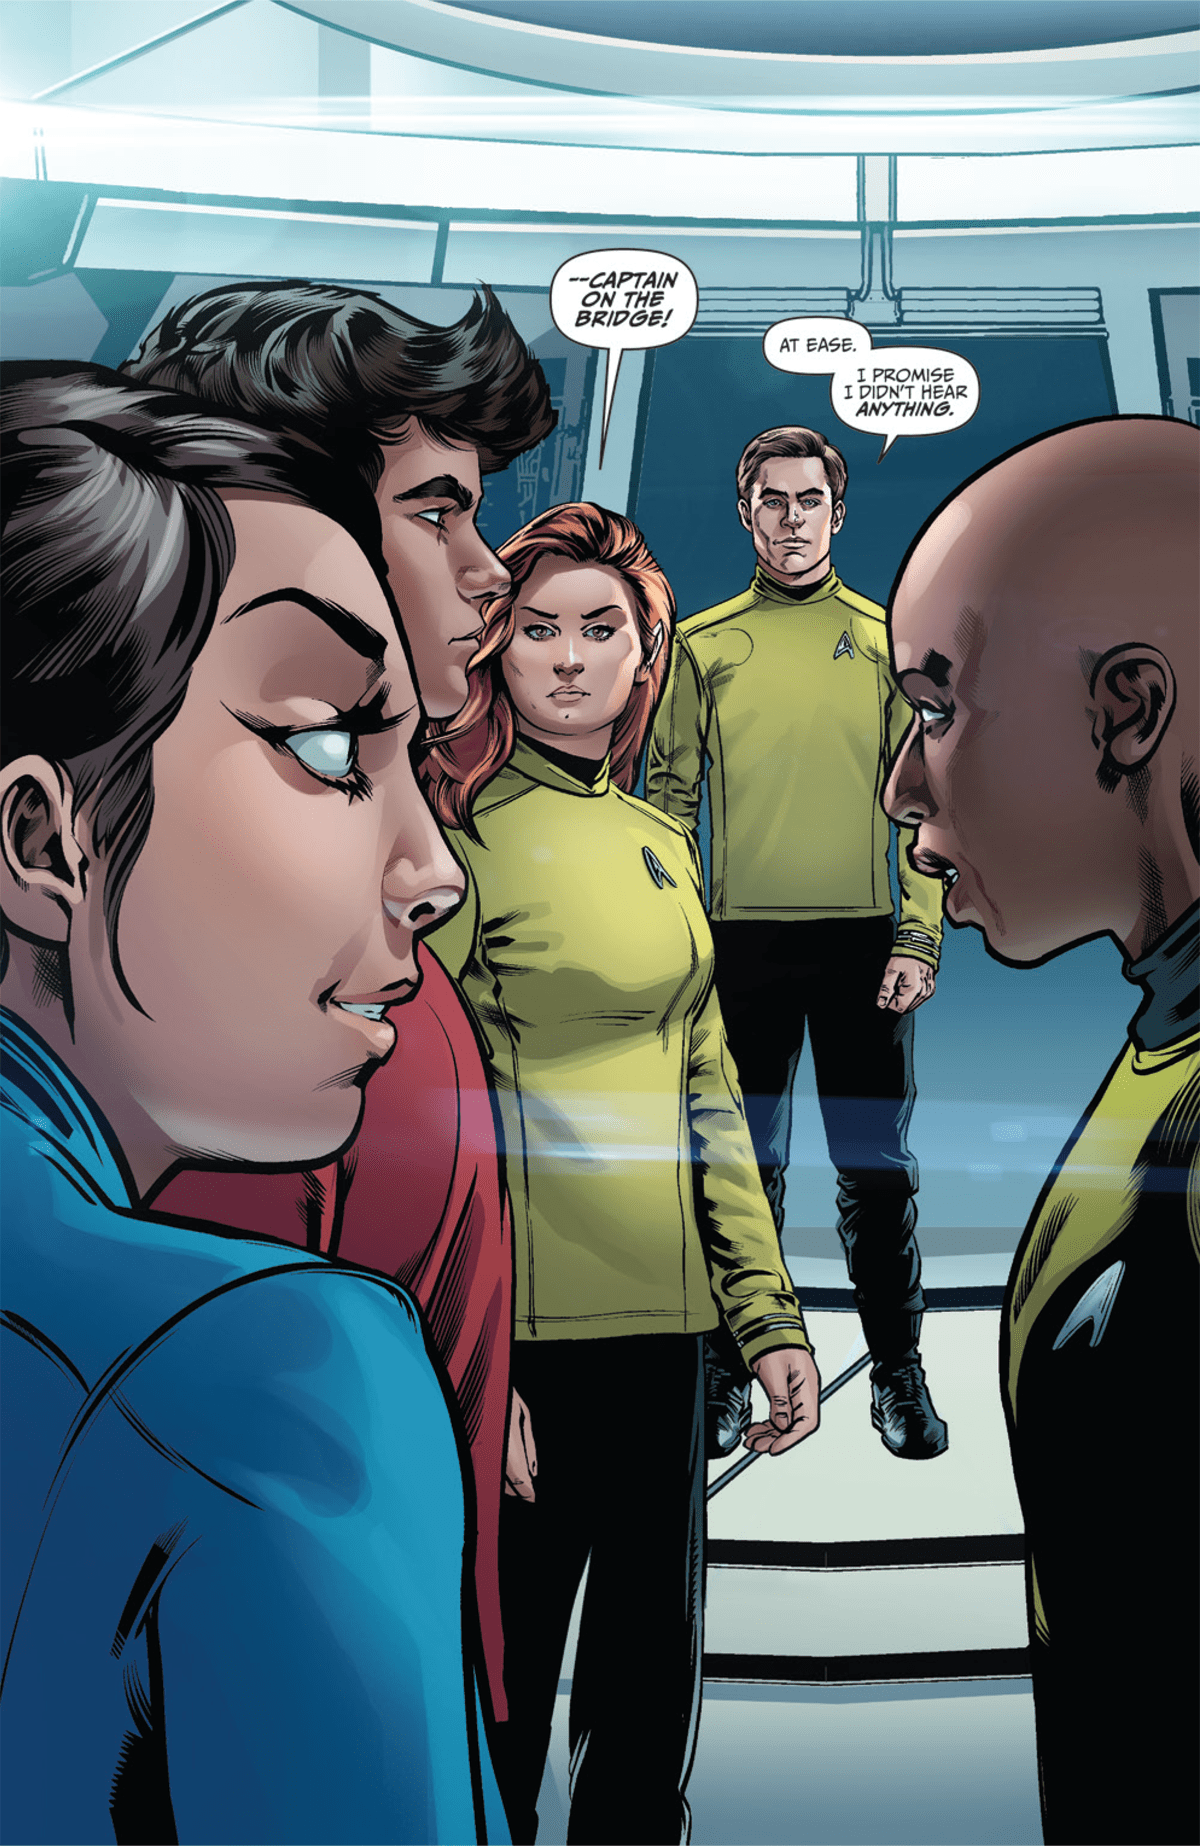 Captain Kirk Has A Surprising New Mission In The New Star Trek Comic